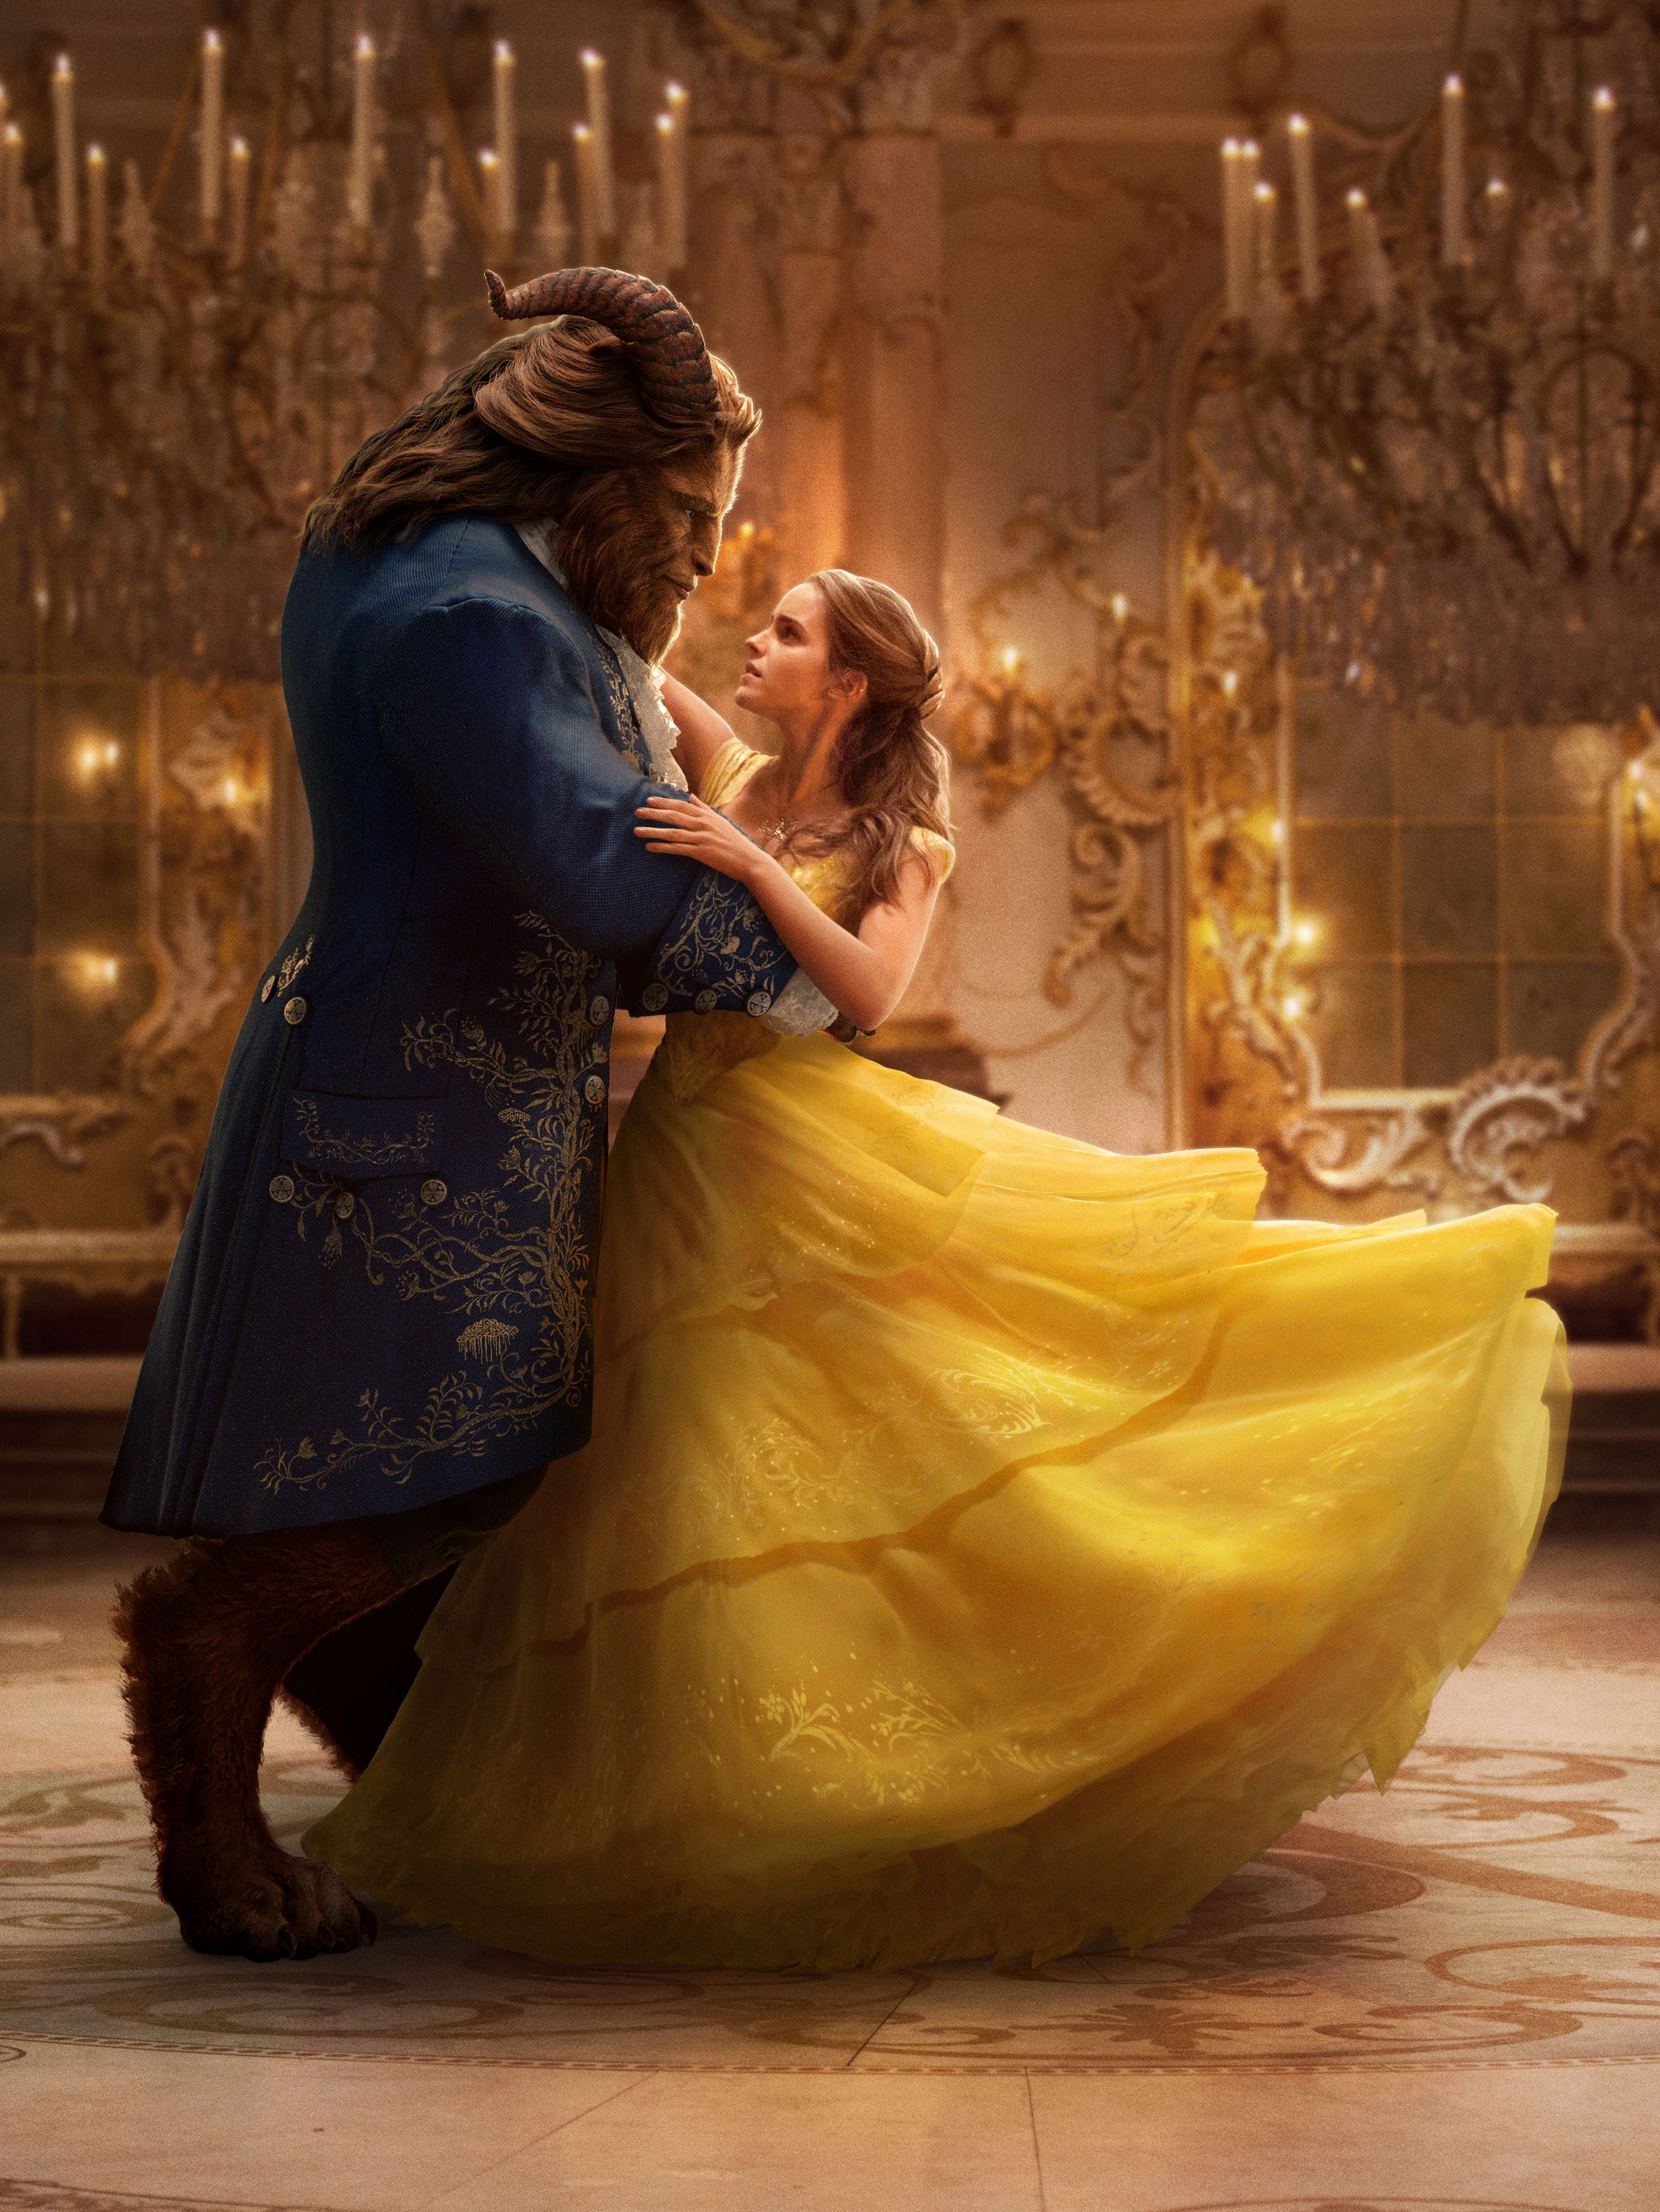 Beauty and the Beast Live-Action Images of Emma Watson | Collider